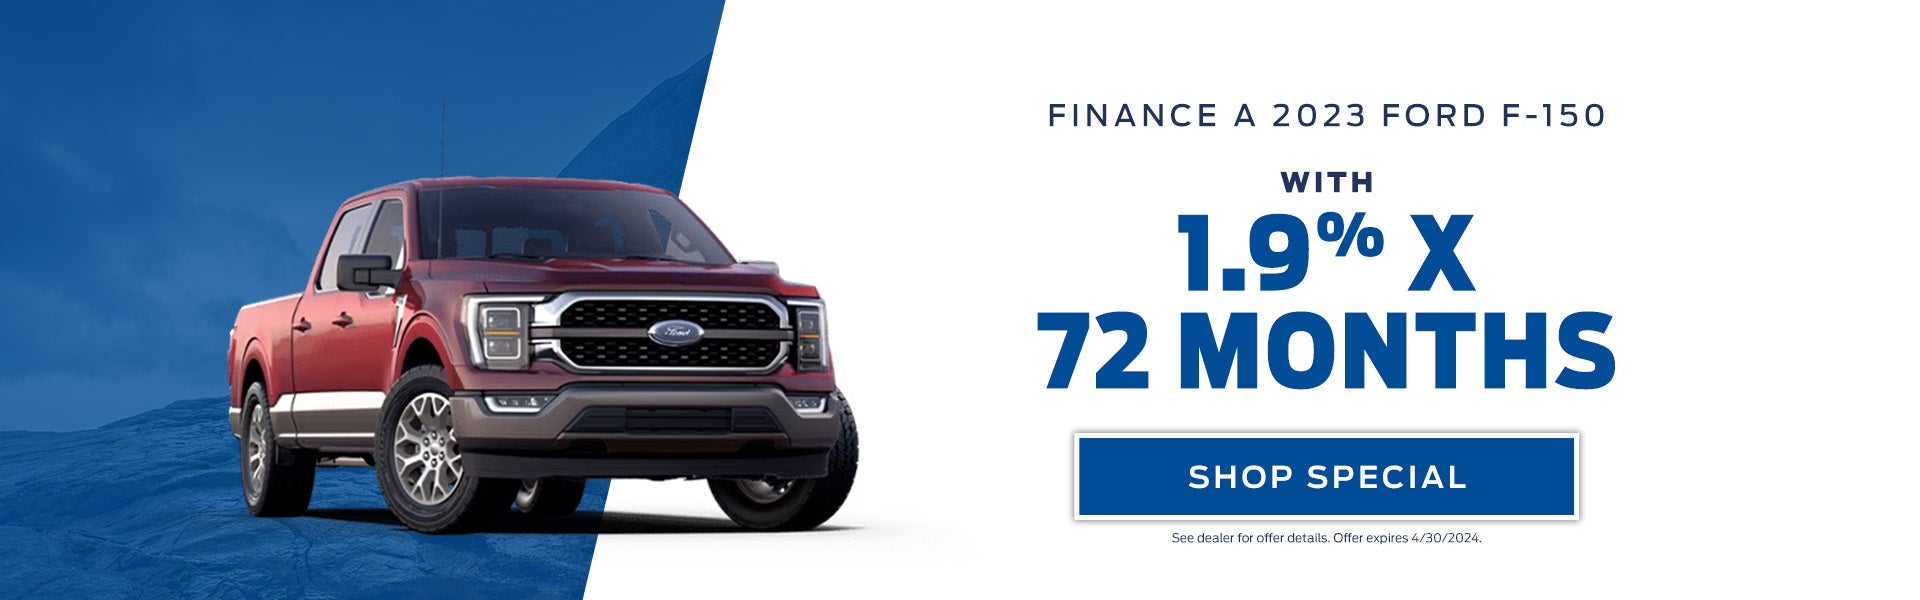 Finance a 2023 Ford F-150 with 1.9% X 72 Months 